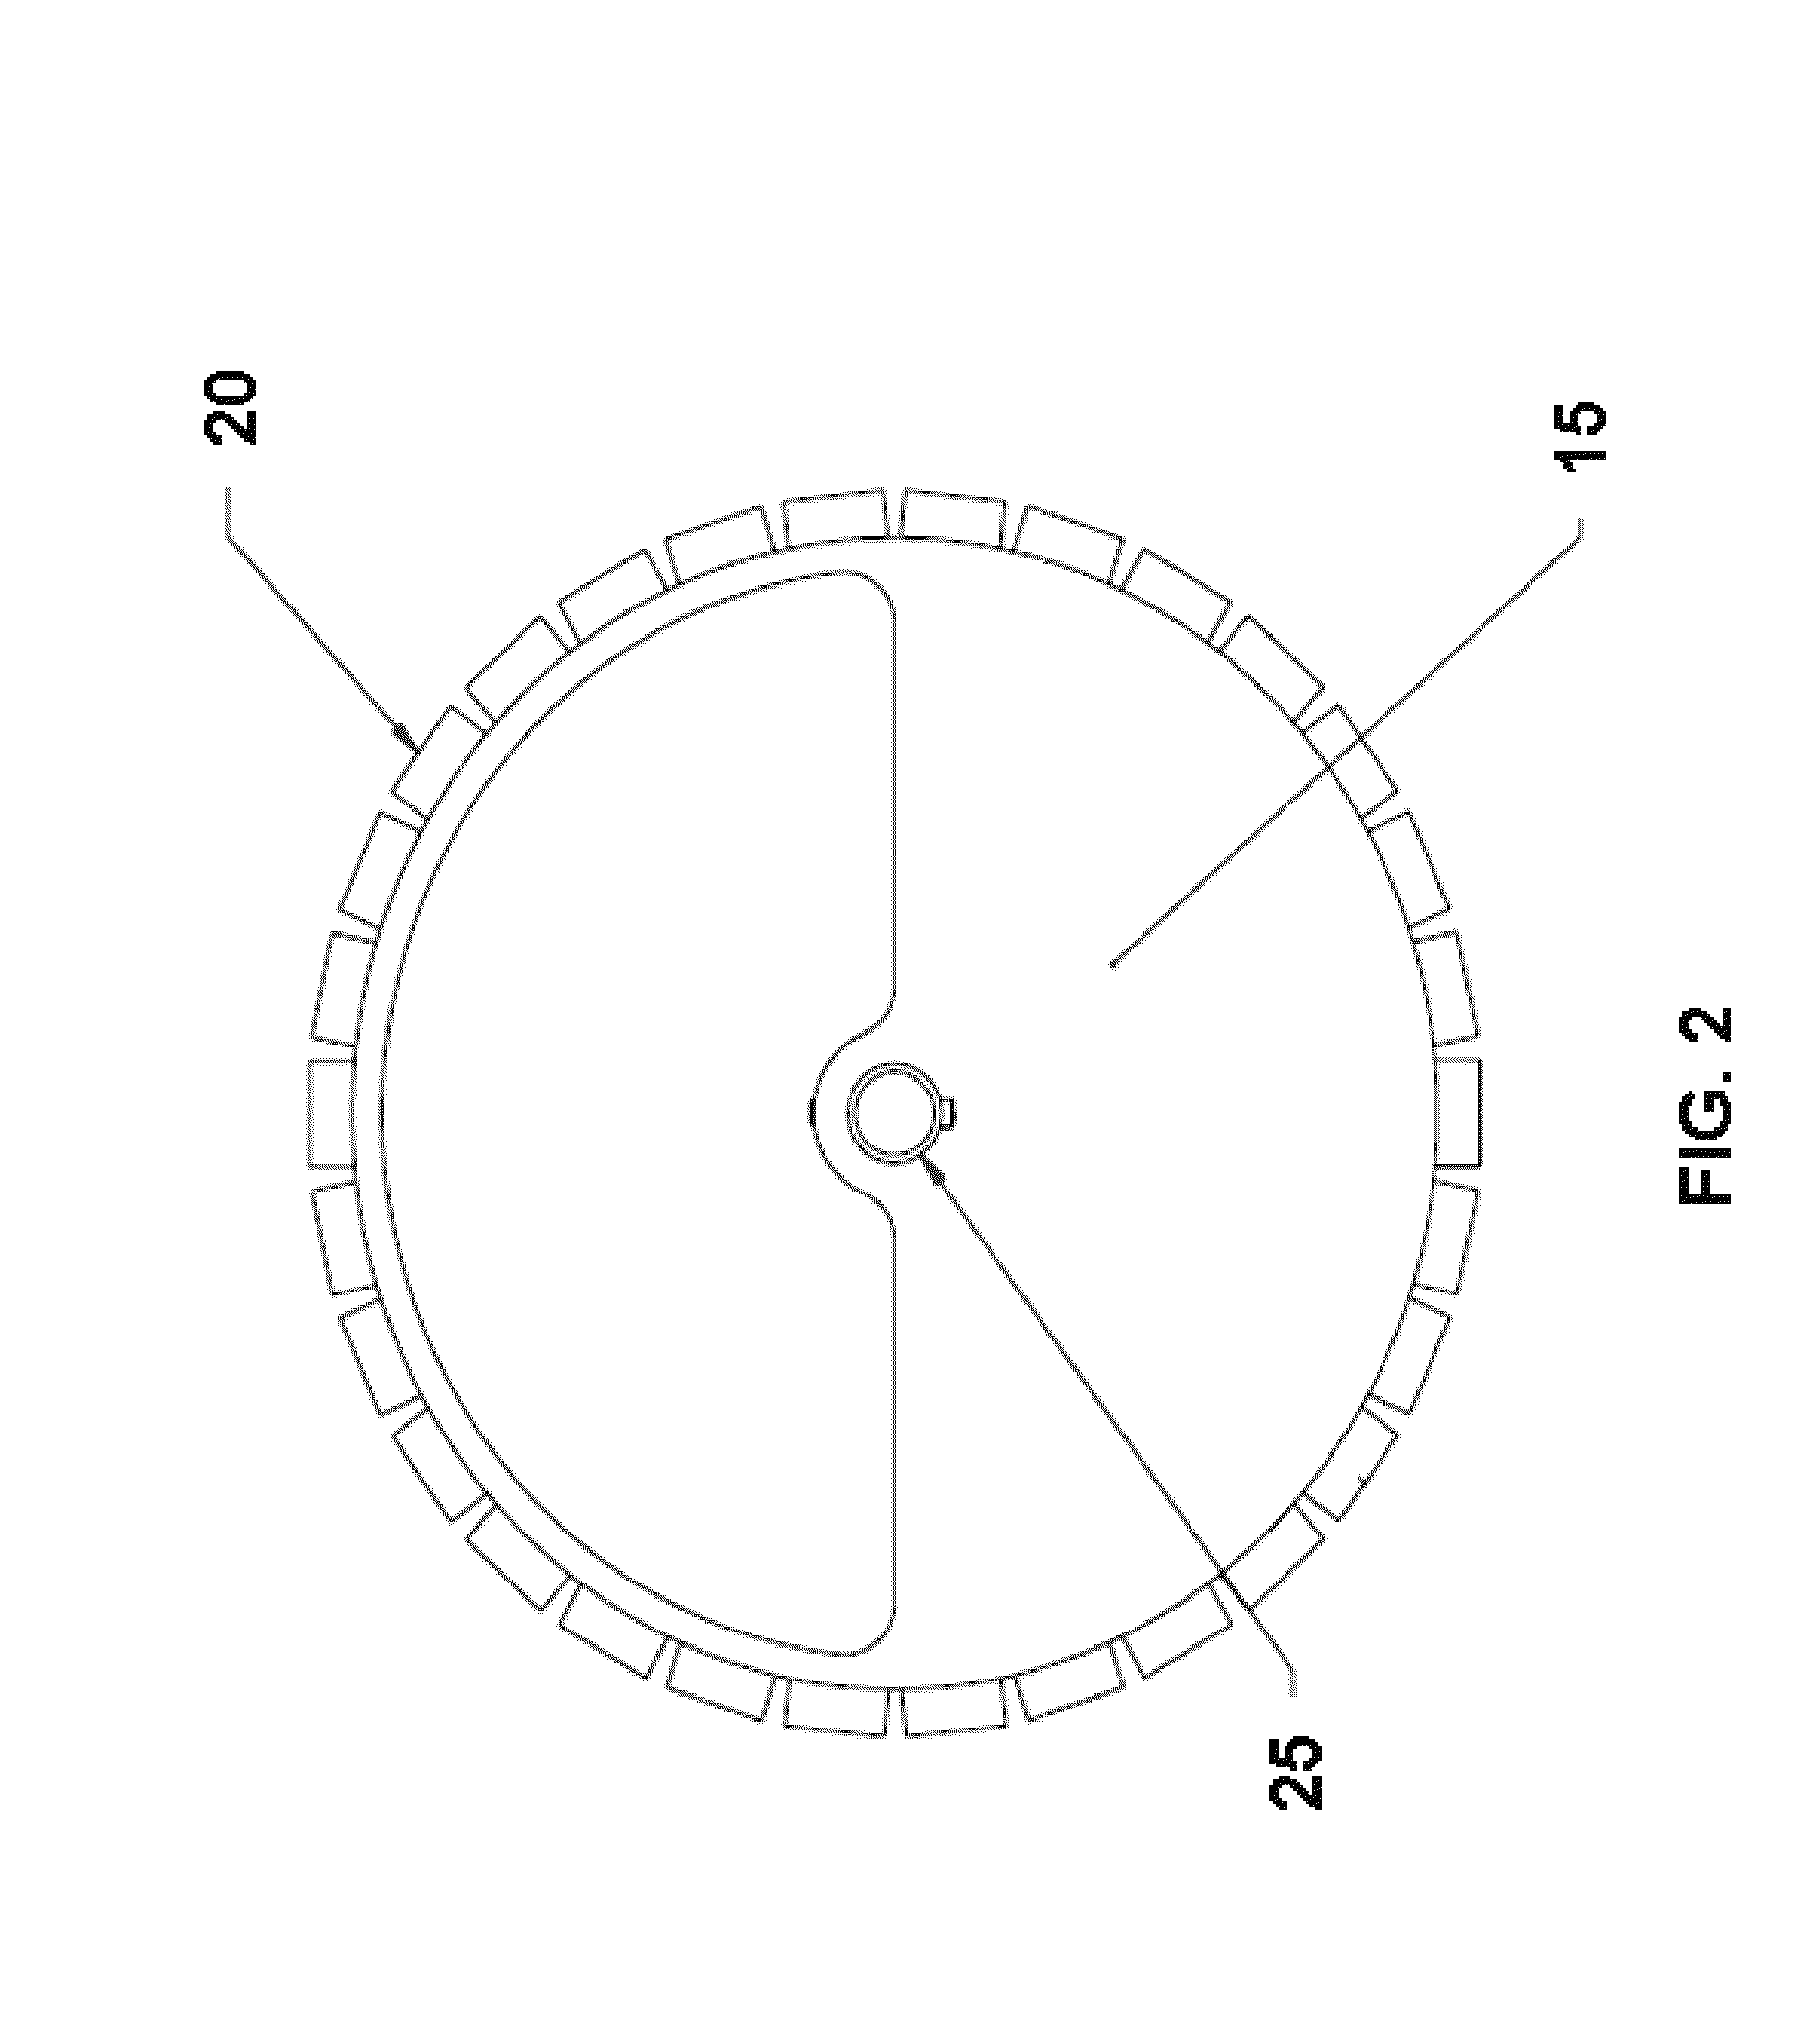 Radial flux permanent magnet alternator with dielectric stator block